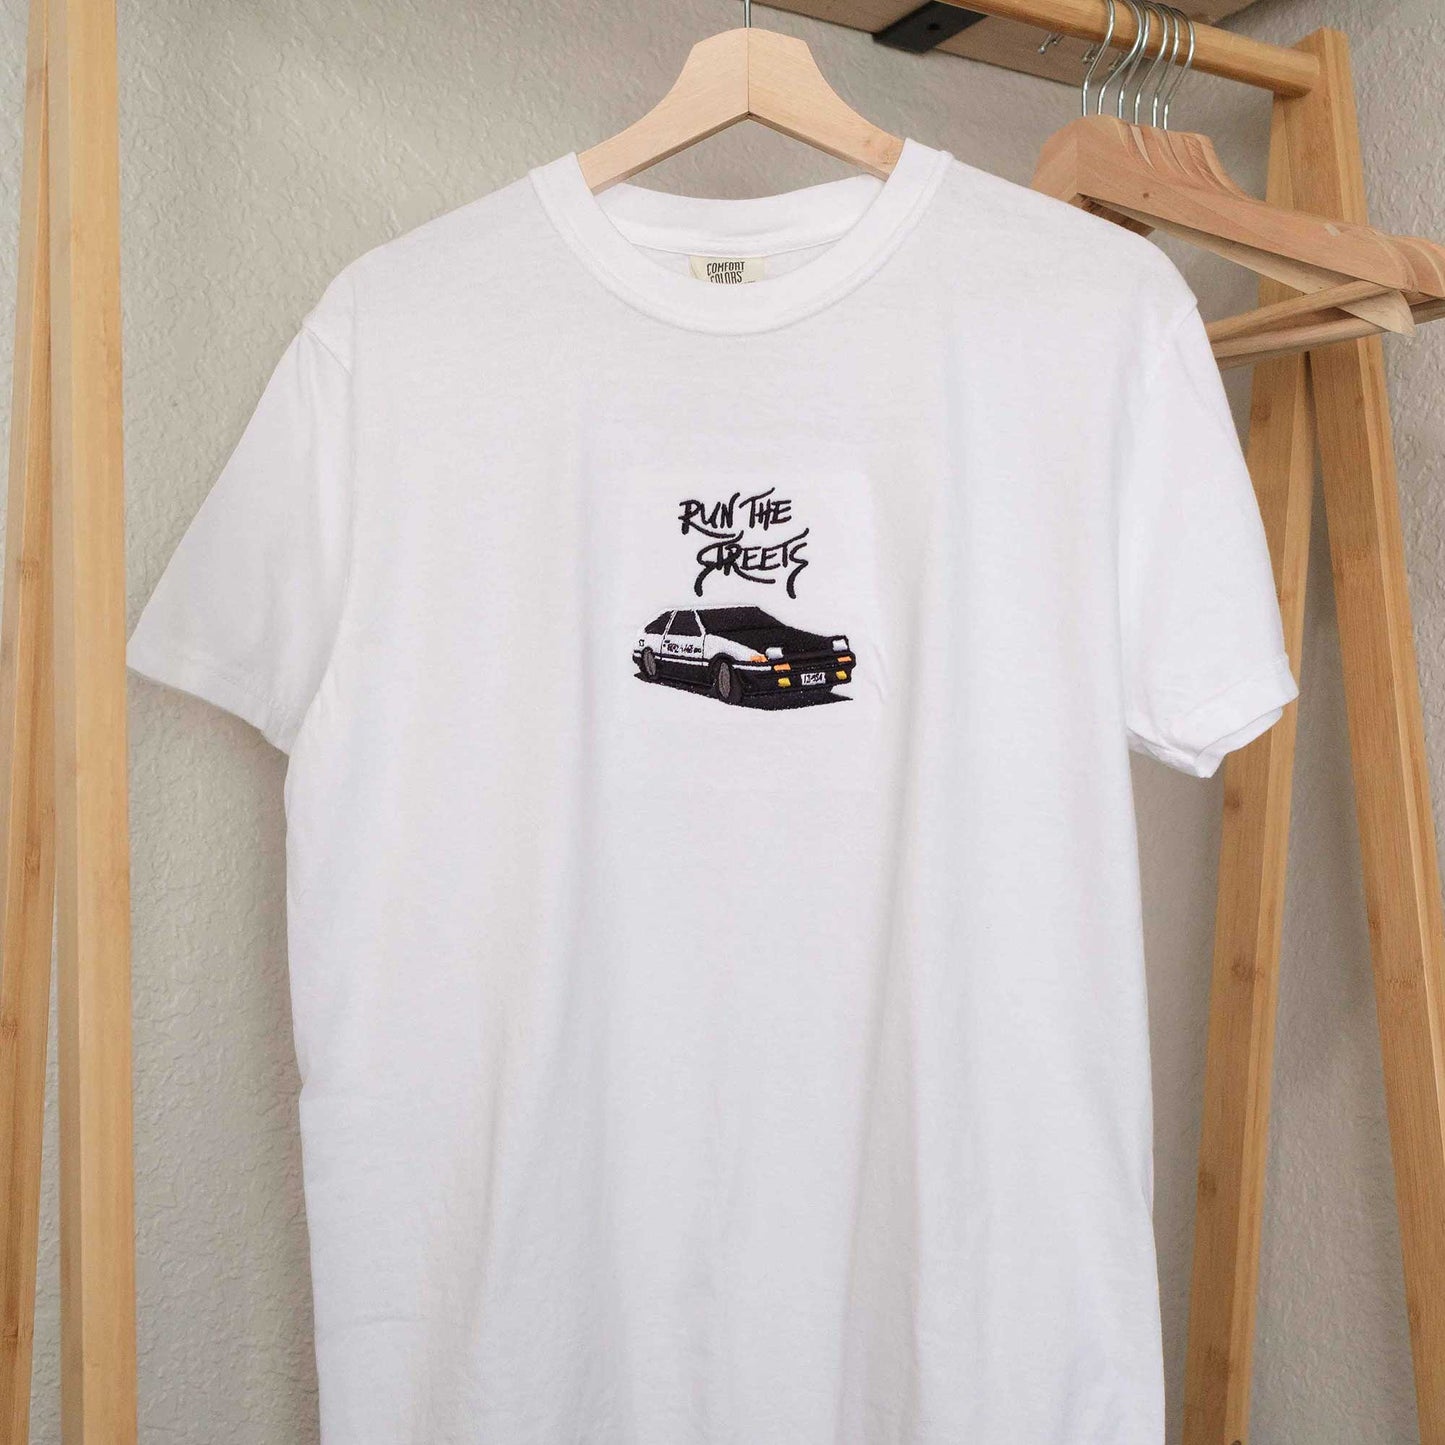 AE86 Embroidered T-Shirt